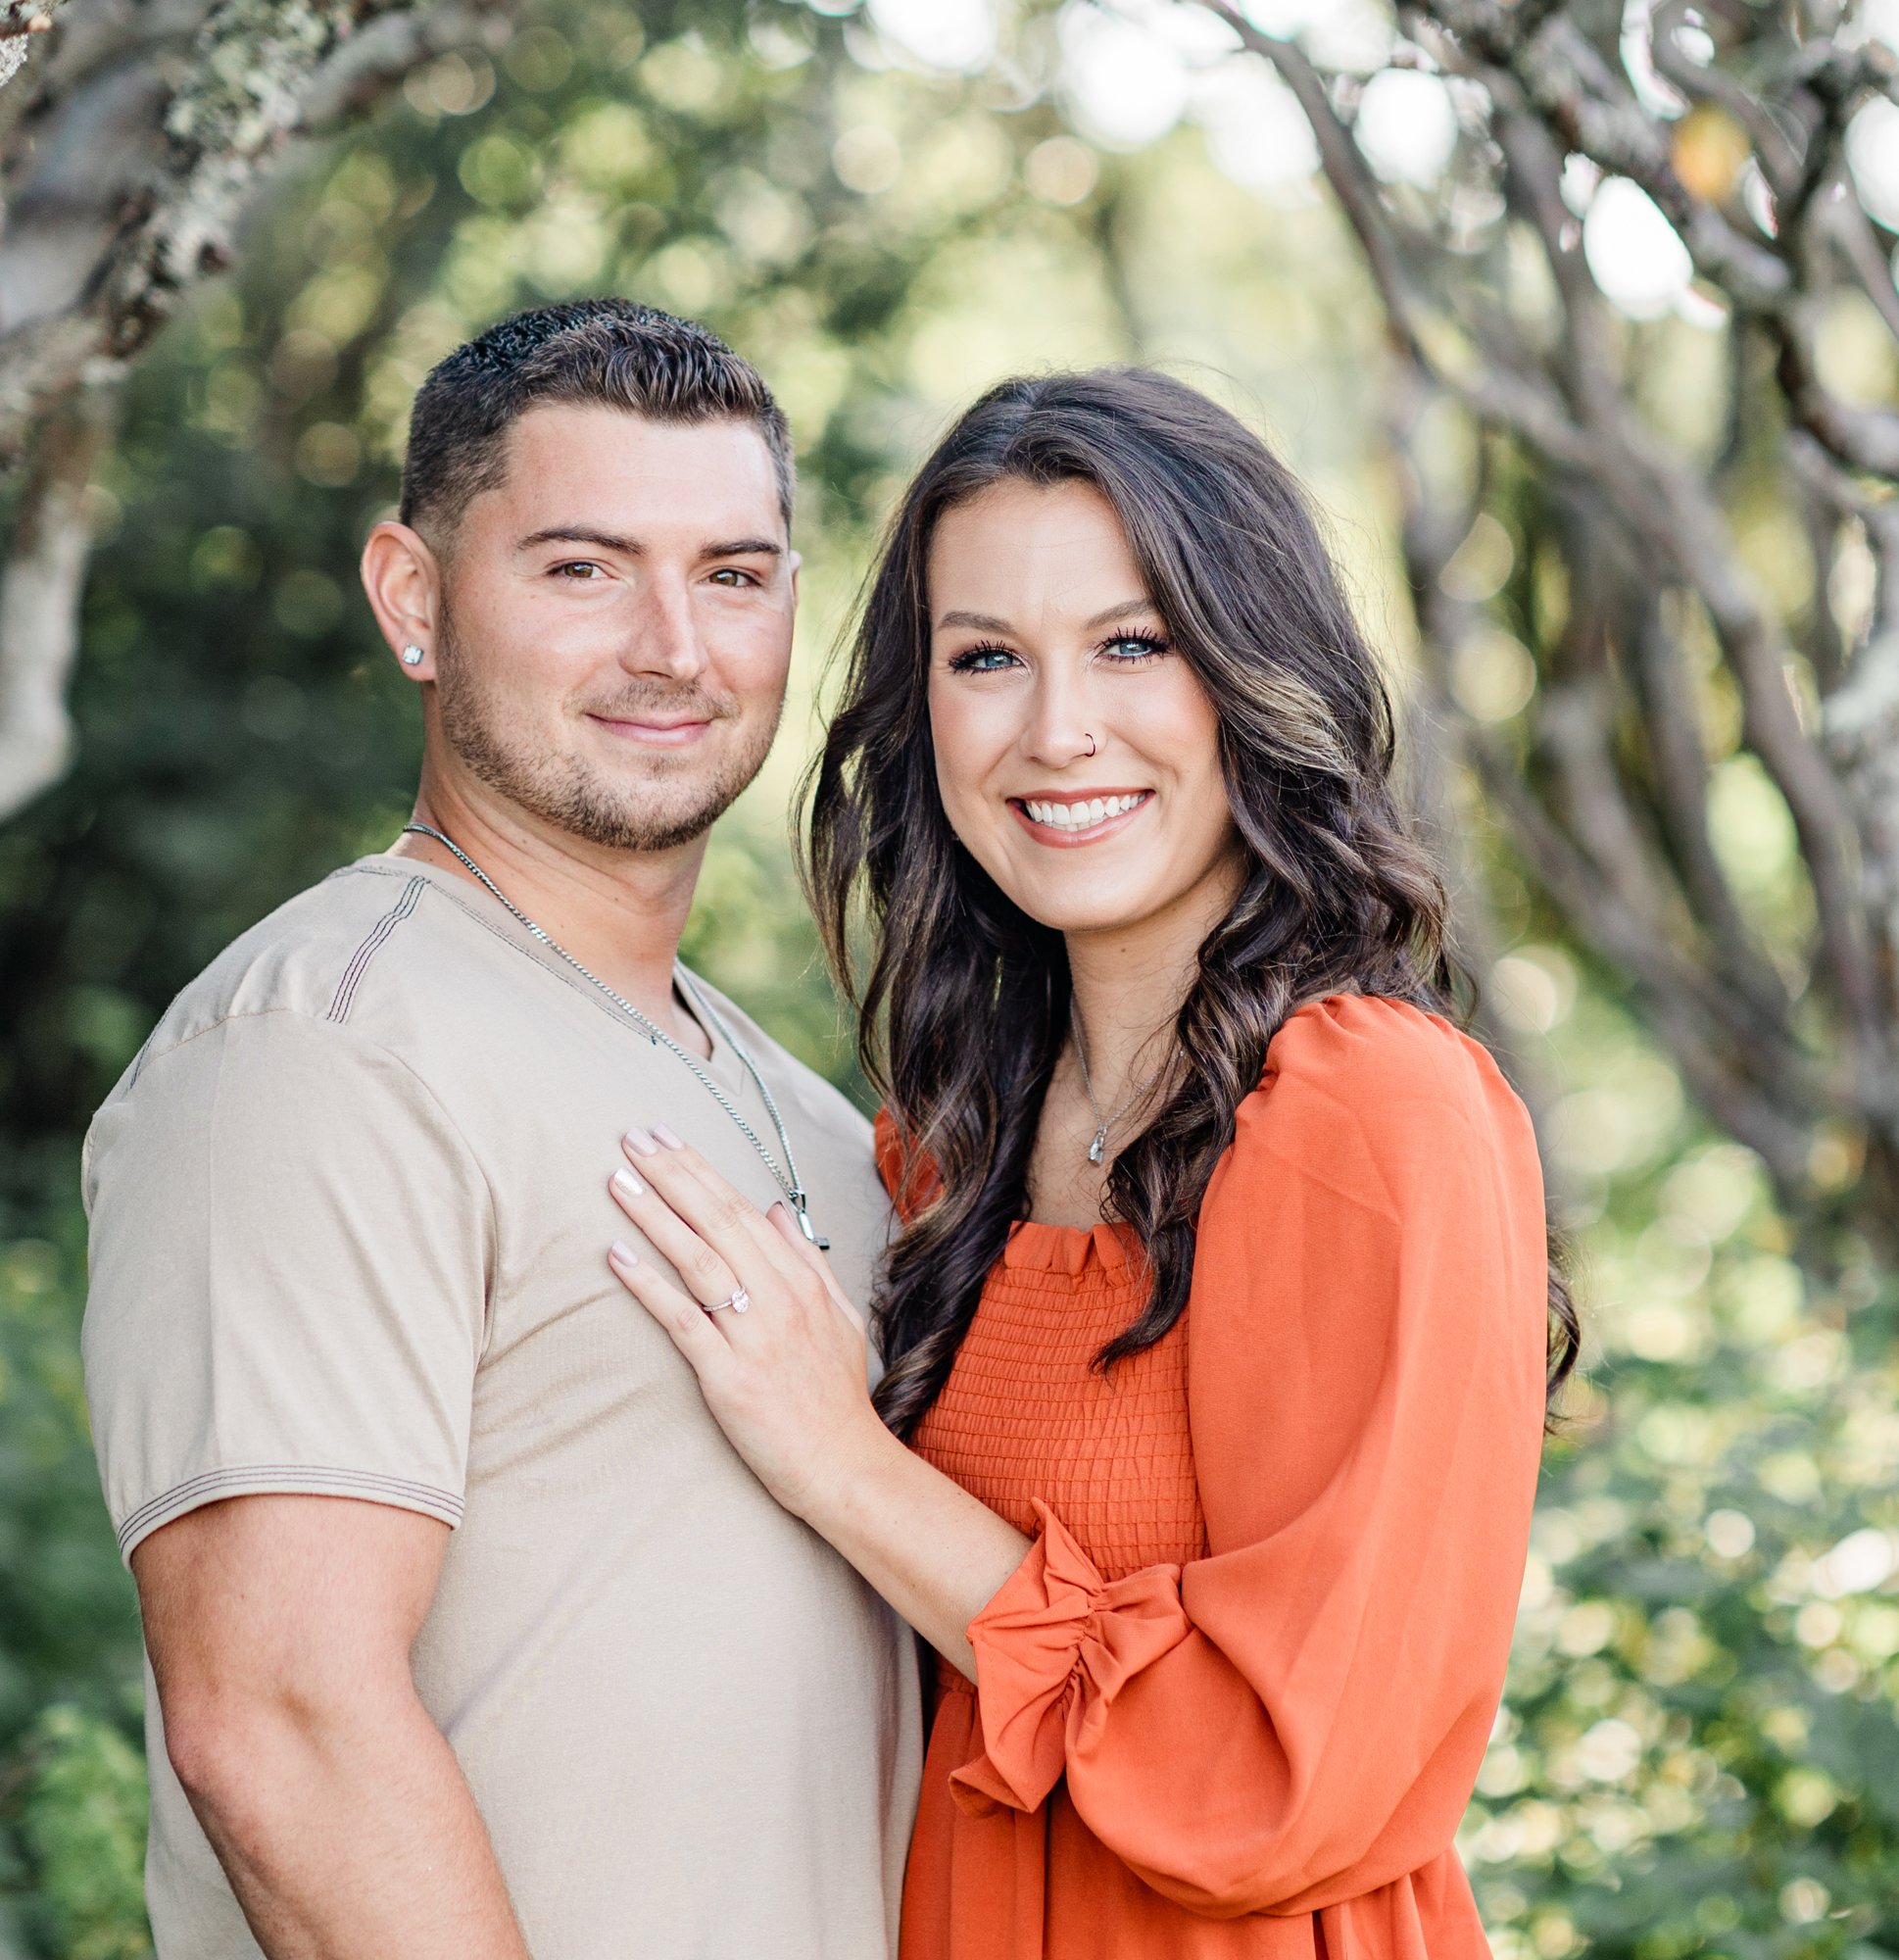 craggy gardens engagement session-2.jpg